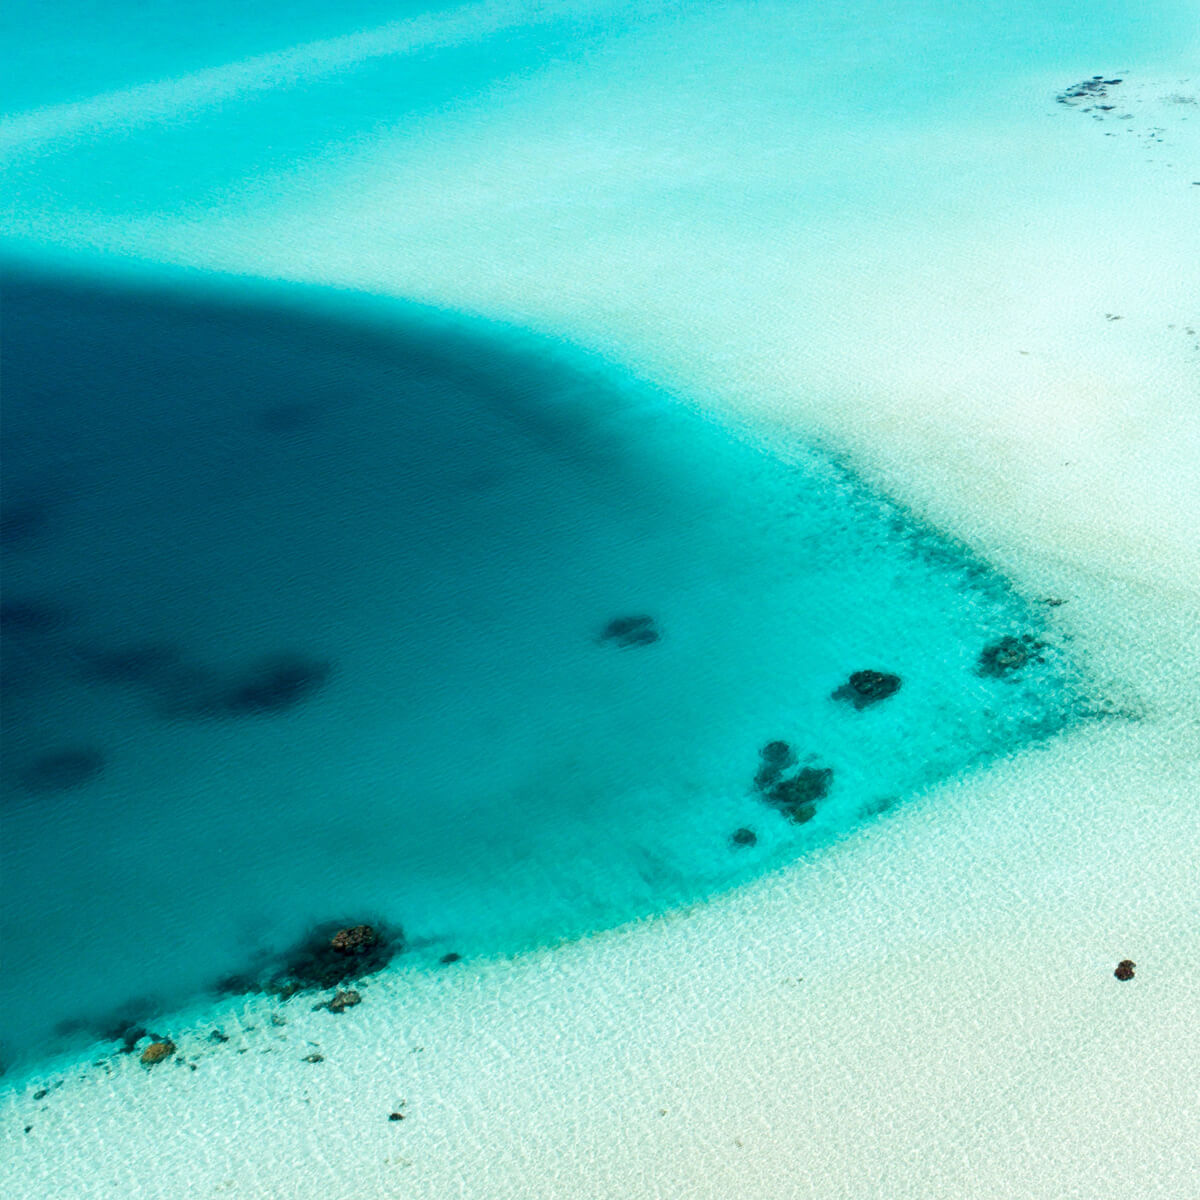 ultimate-yachts-maldives-ishan-seefromthesky-03